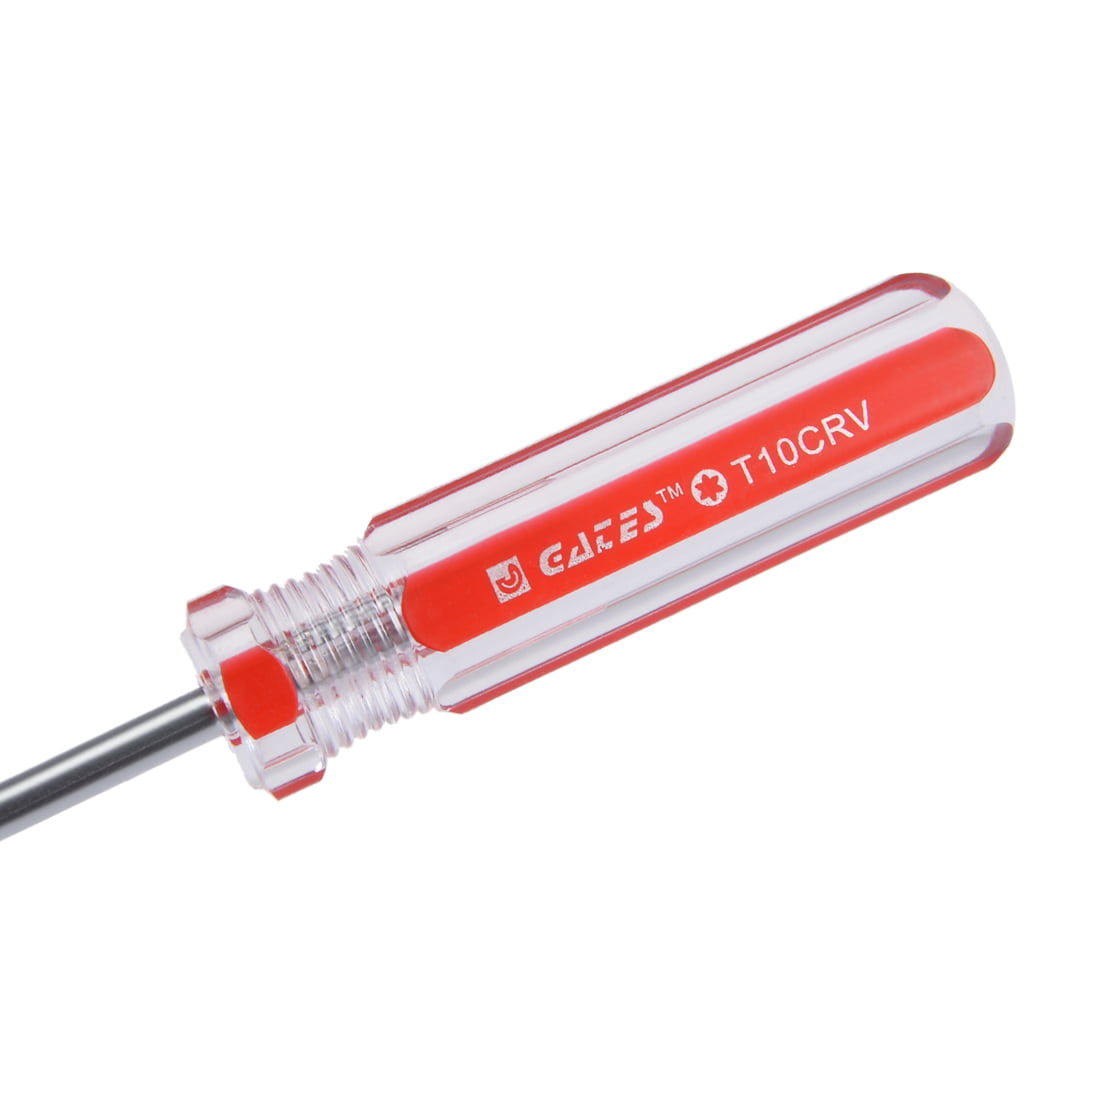 Magnetic T10 Torx Screwdriver with 4 Inch Cr-V Steel Shaft 